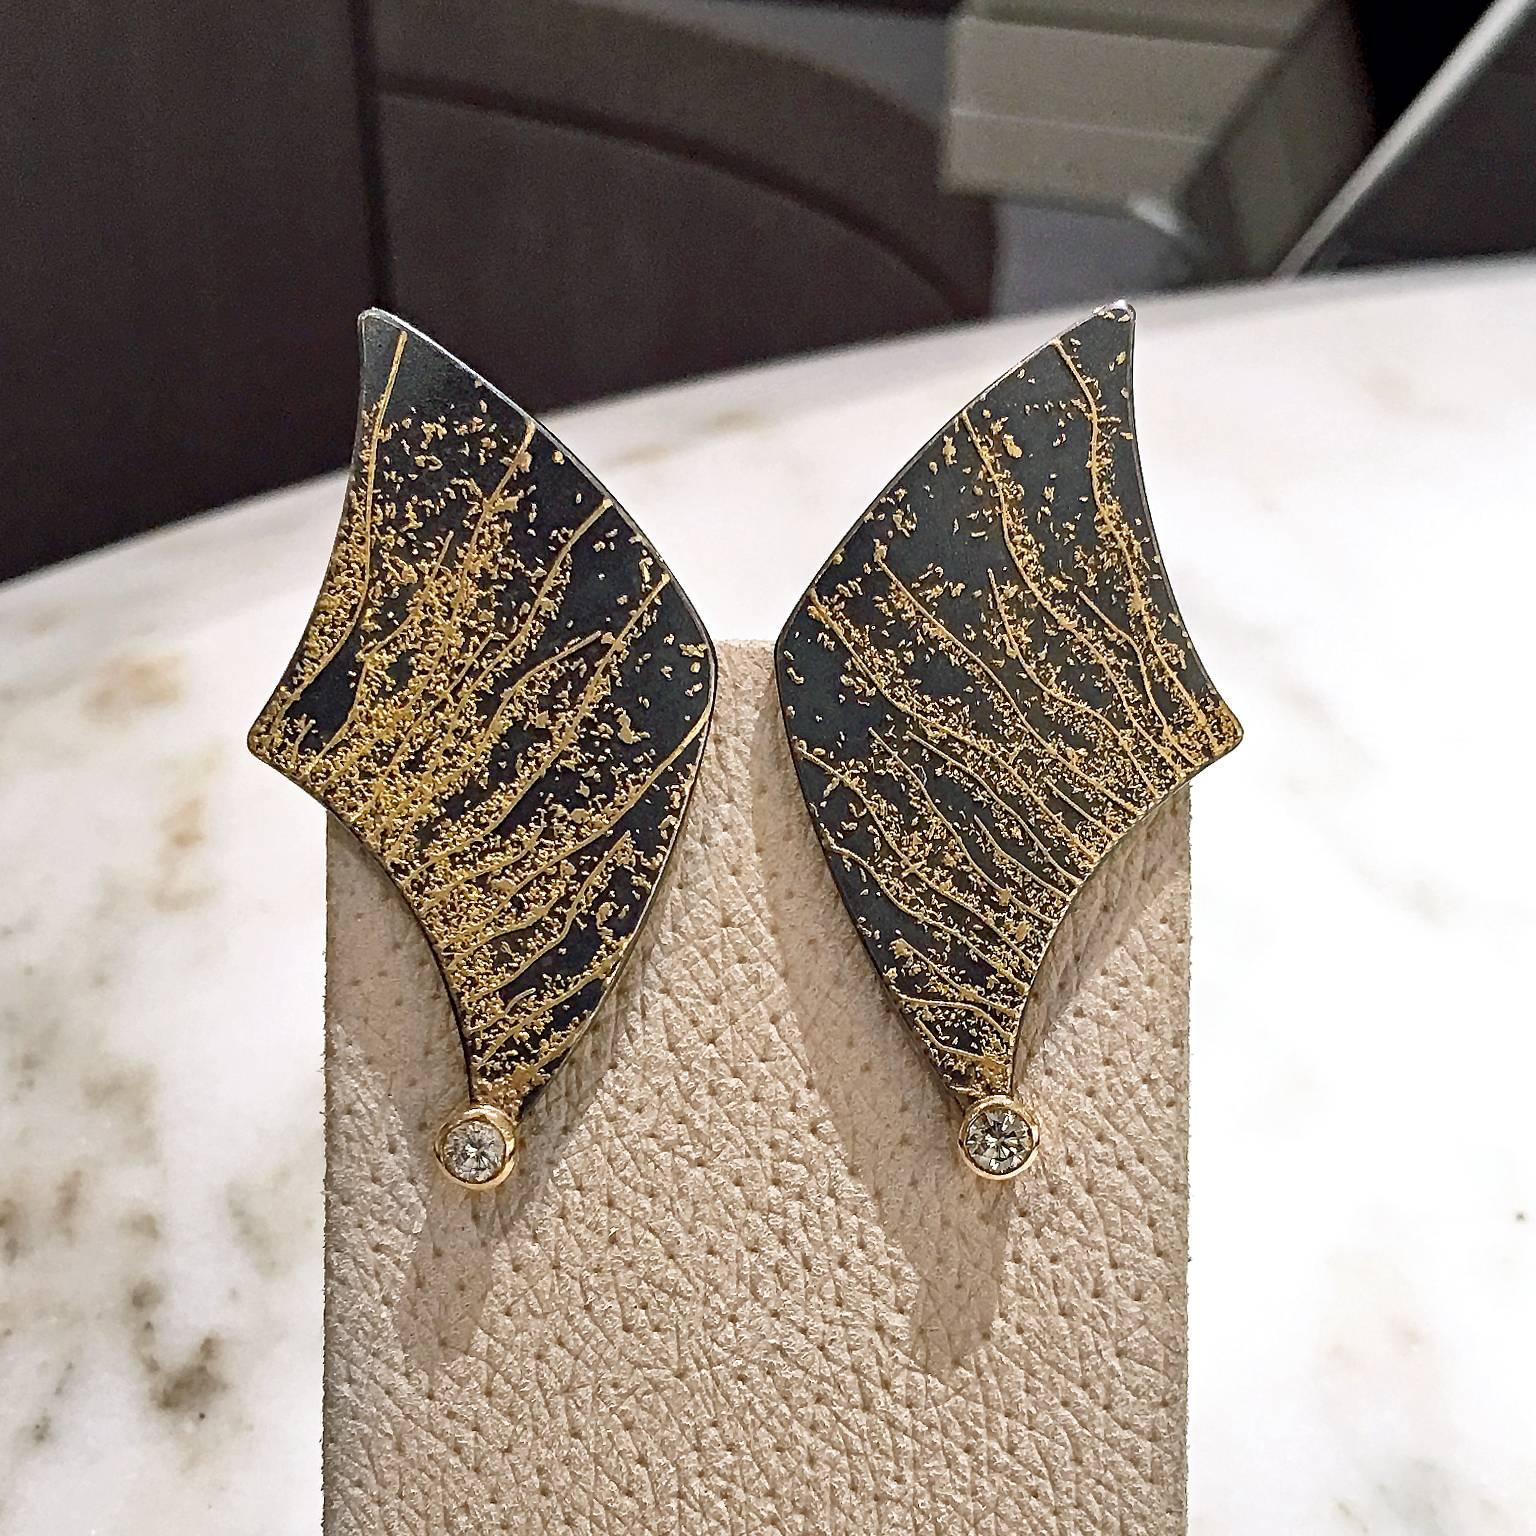 One of a Kind Wing Earrings handcrafted by internationally collected jewelry artist Atelier Zobel (Peter Schmid) in a combination of 18k yellow gold, 24k gold, and oxidized sterling silver with two round brilliant-cut cognac diamonds totaling 0.18